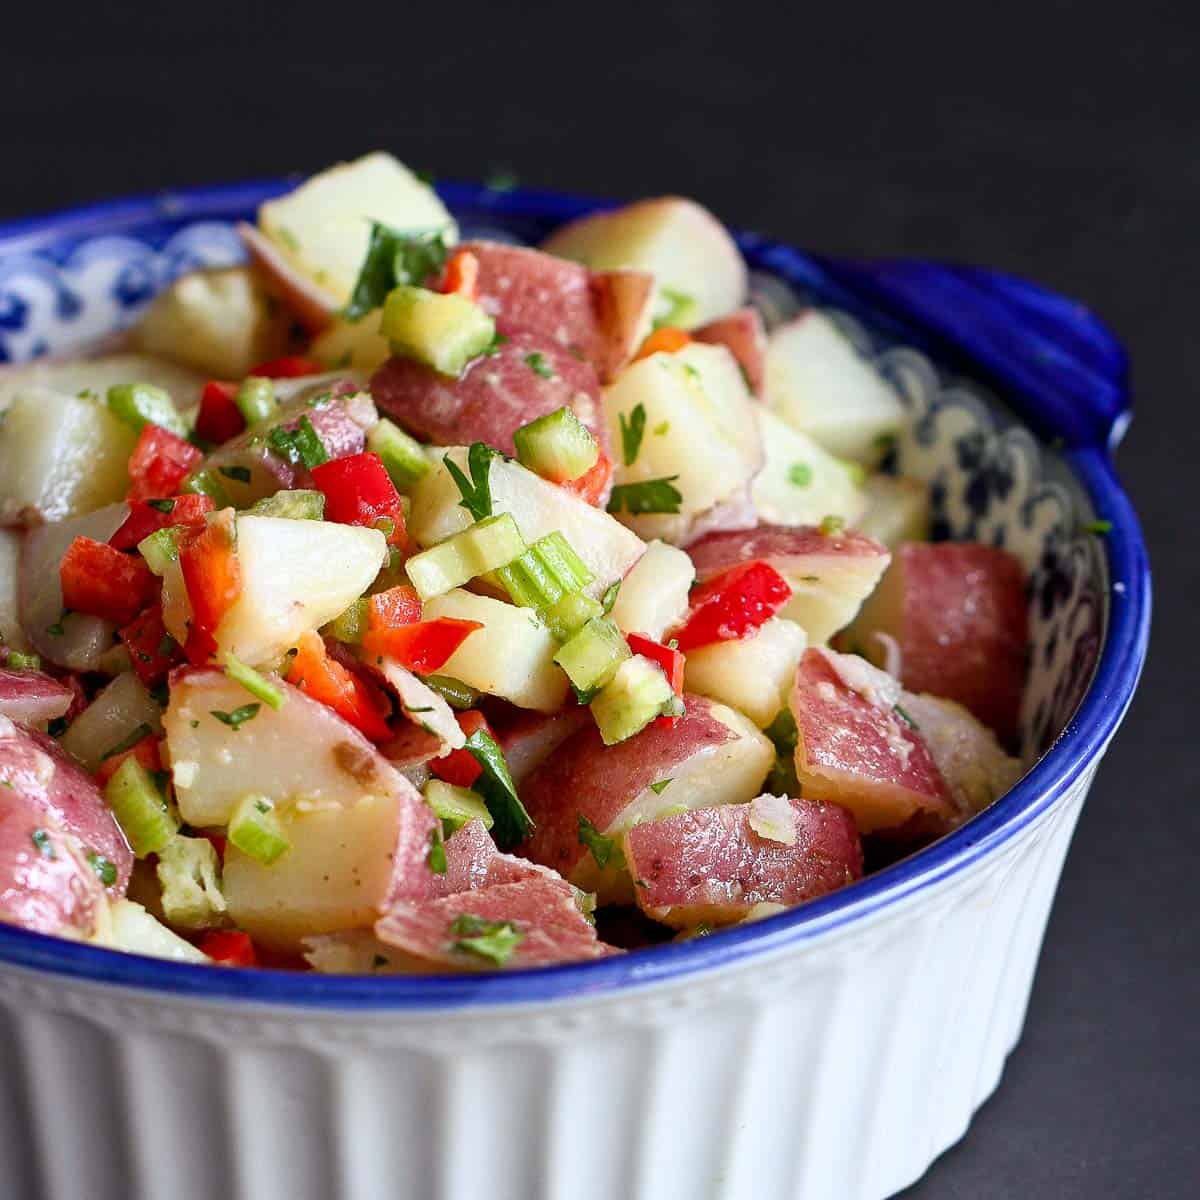 Potato salad with red pepper and celery in a blue and white bowl.